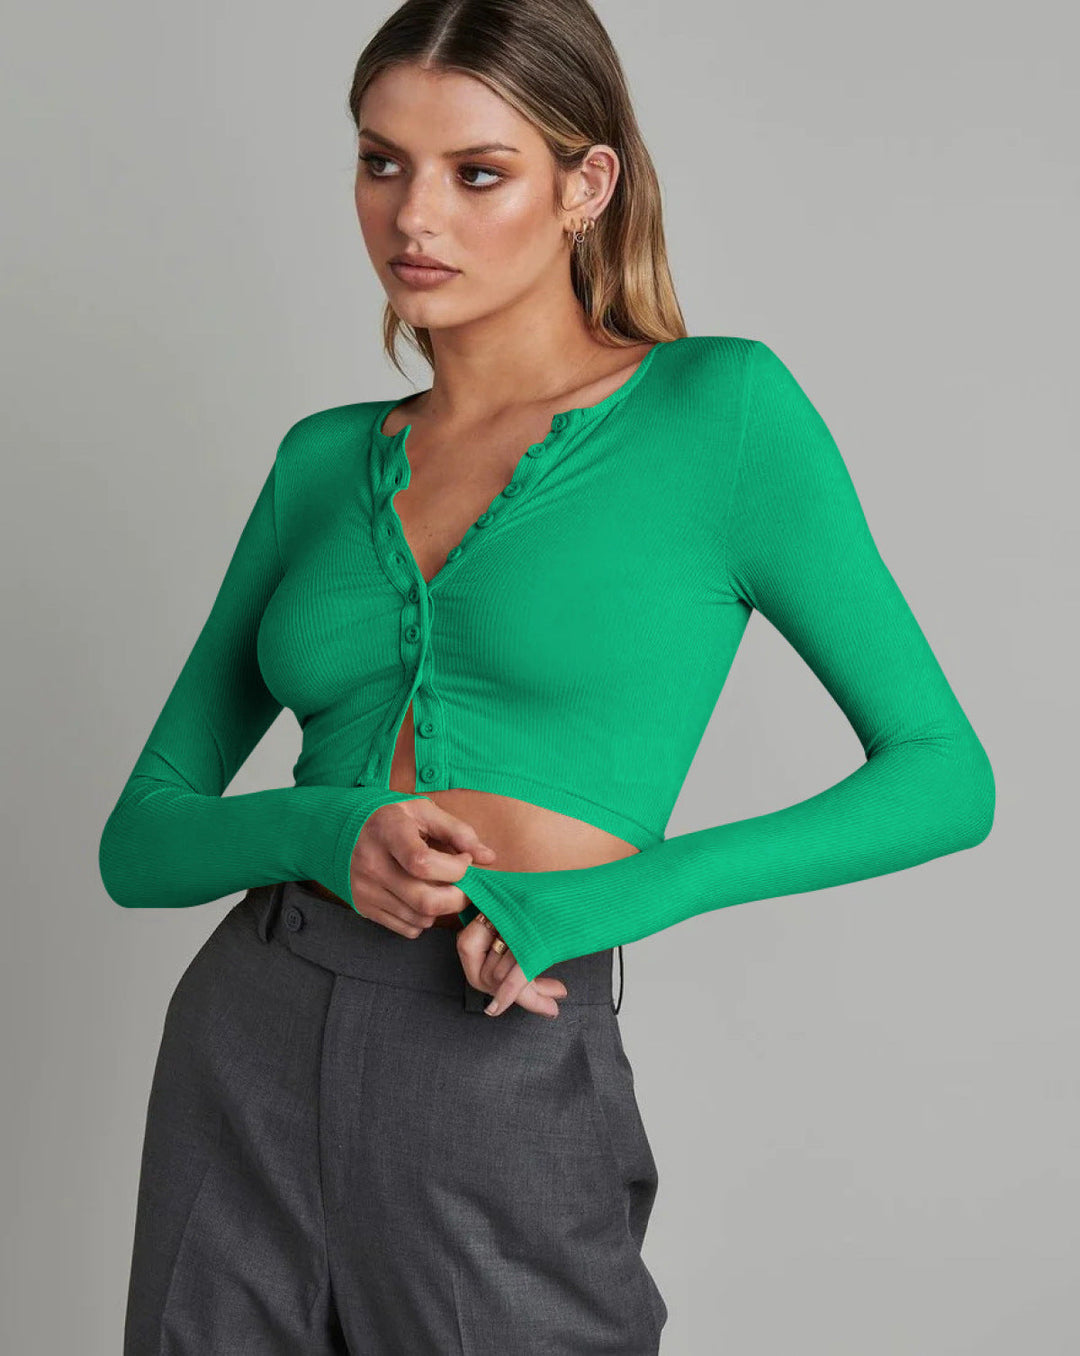 Single-Breasted V-Neck Solid Crop Top